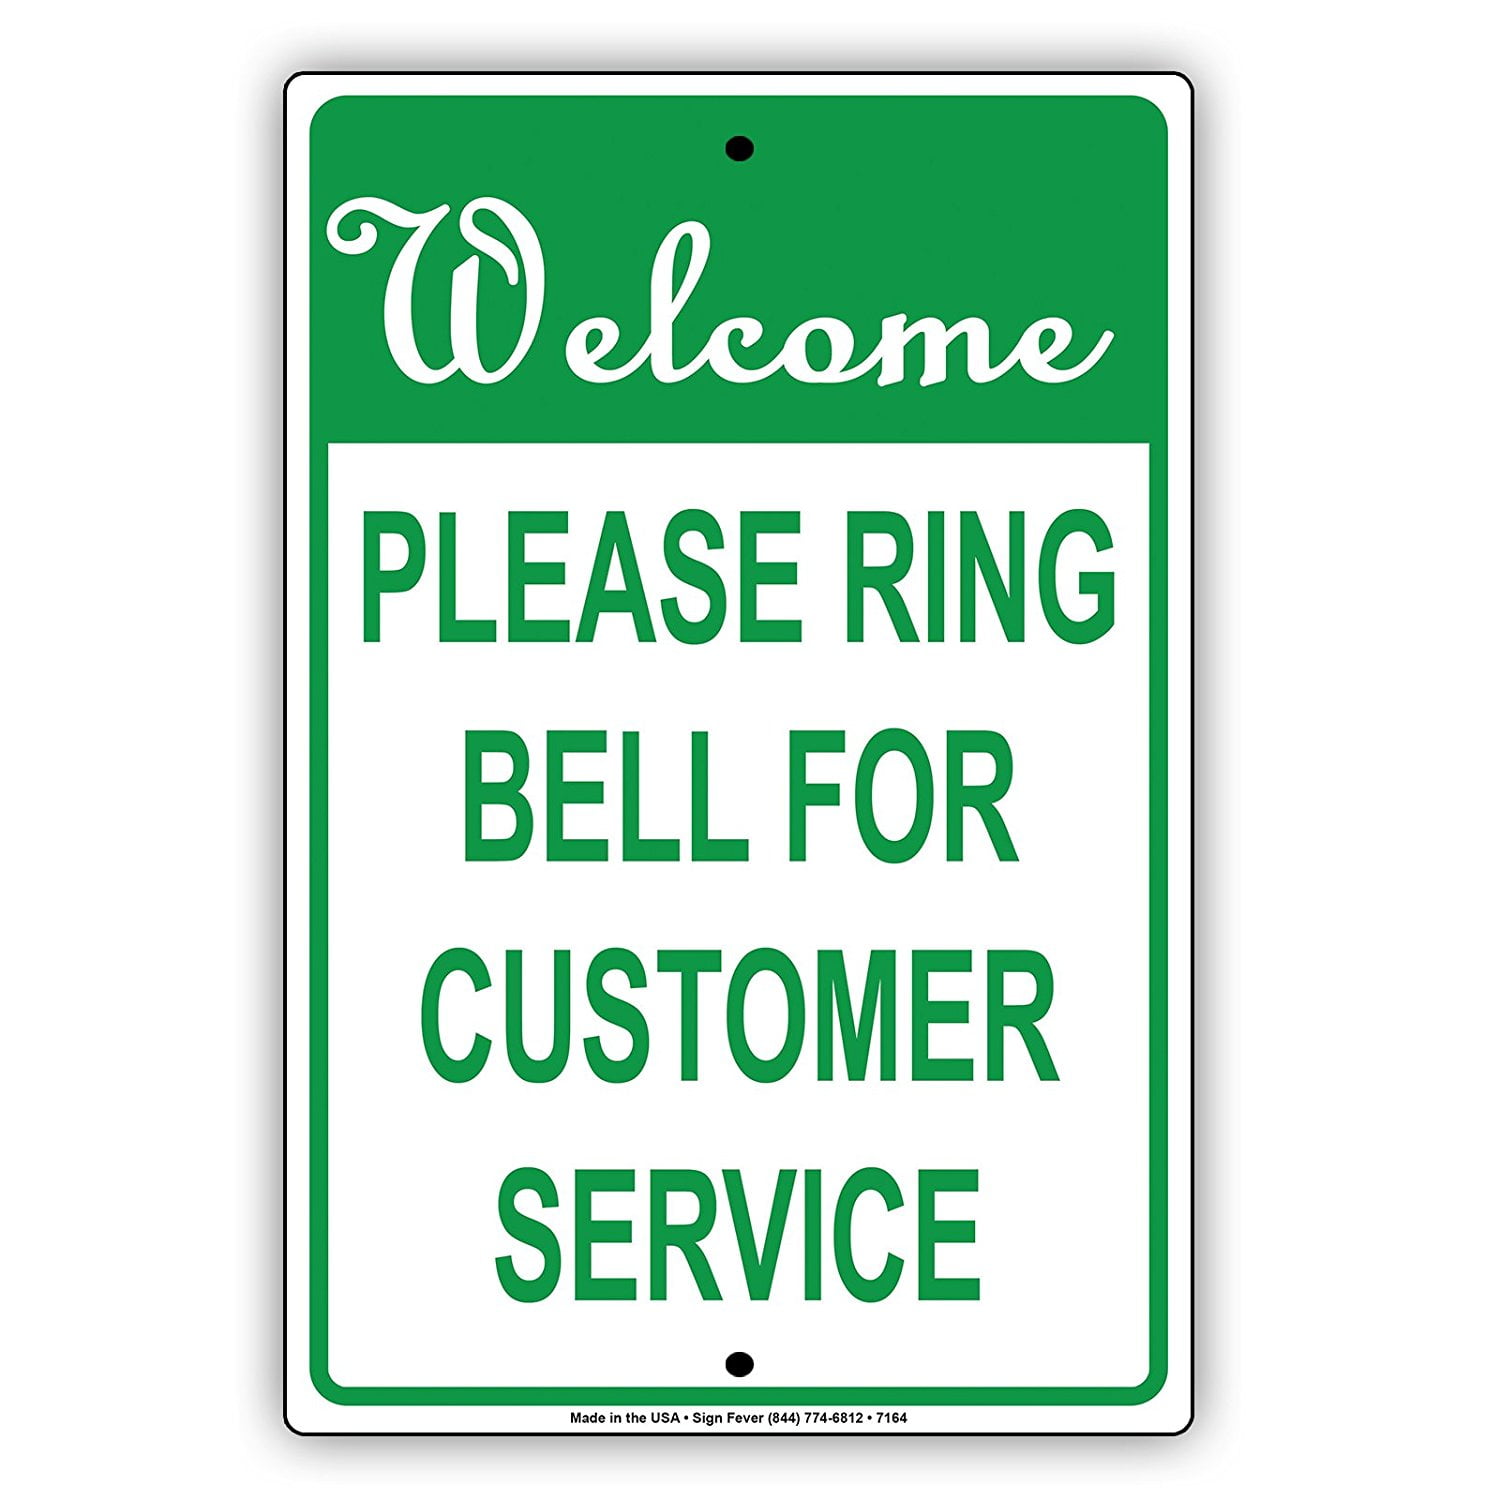 Service notice. Ring a Bell идиома. Please Welcome.